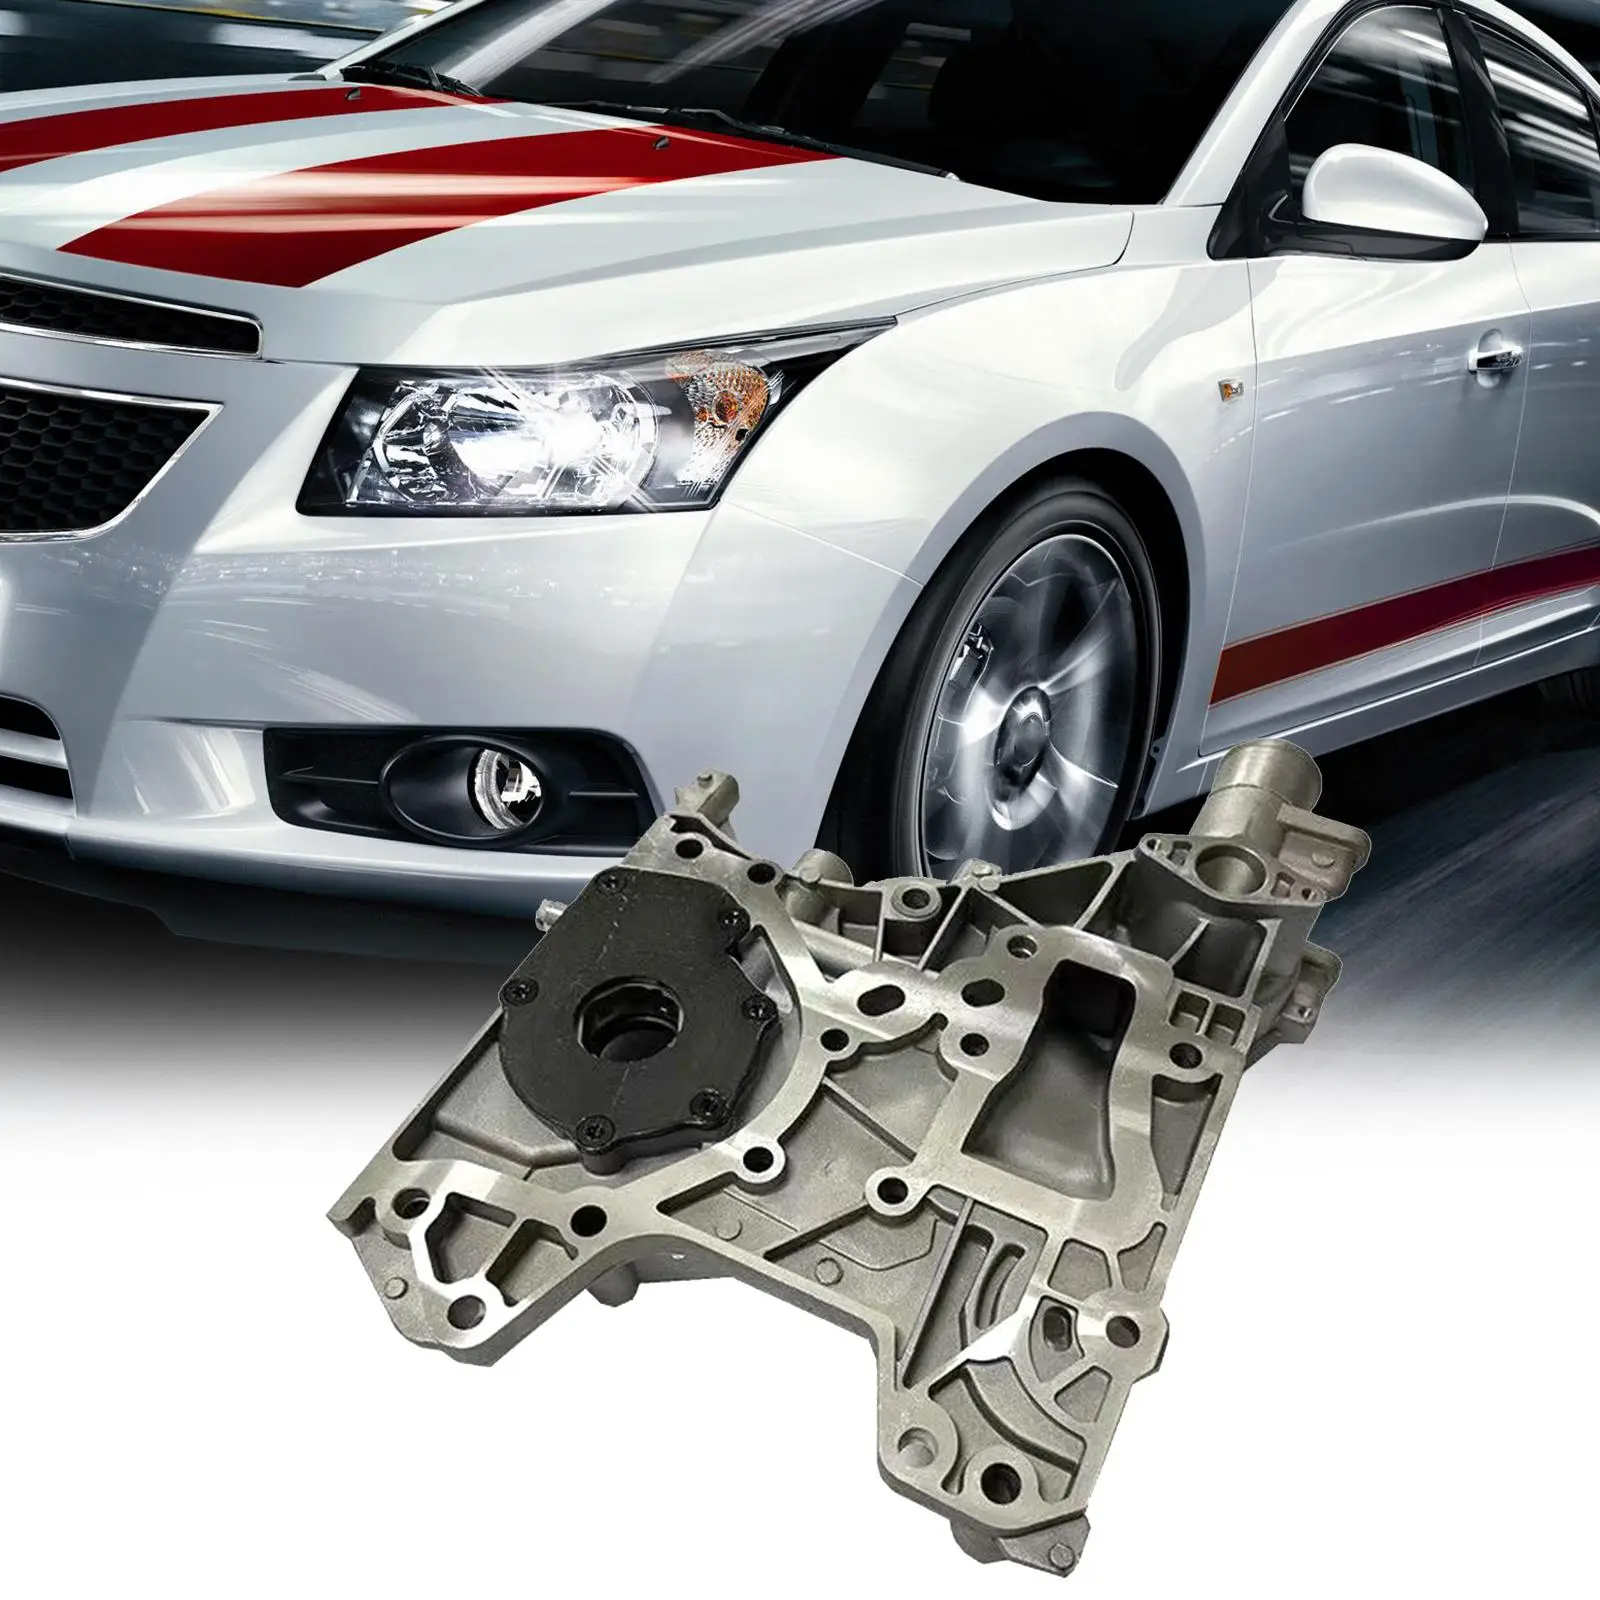 Timing Chain Oil Pump Cover 25195117 55556427 Direct Replacement for Insignia Zafira Stable Performance Easily Install